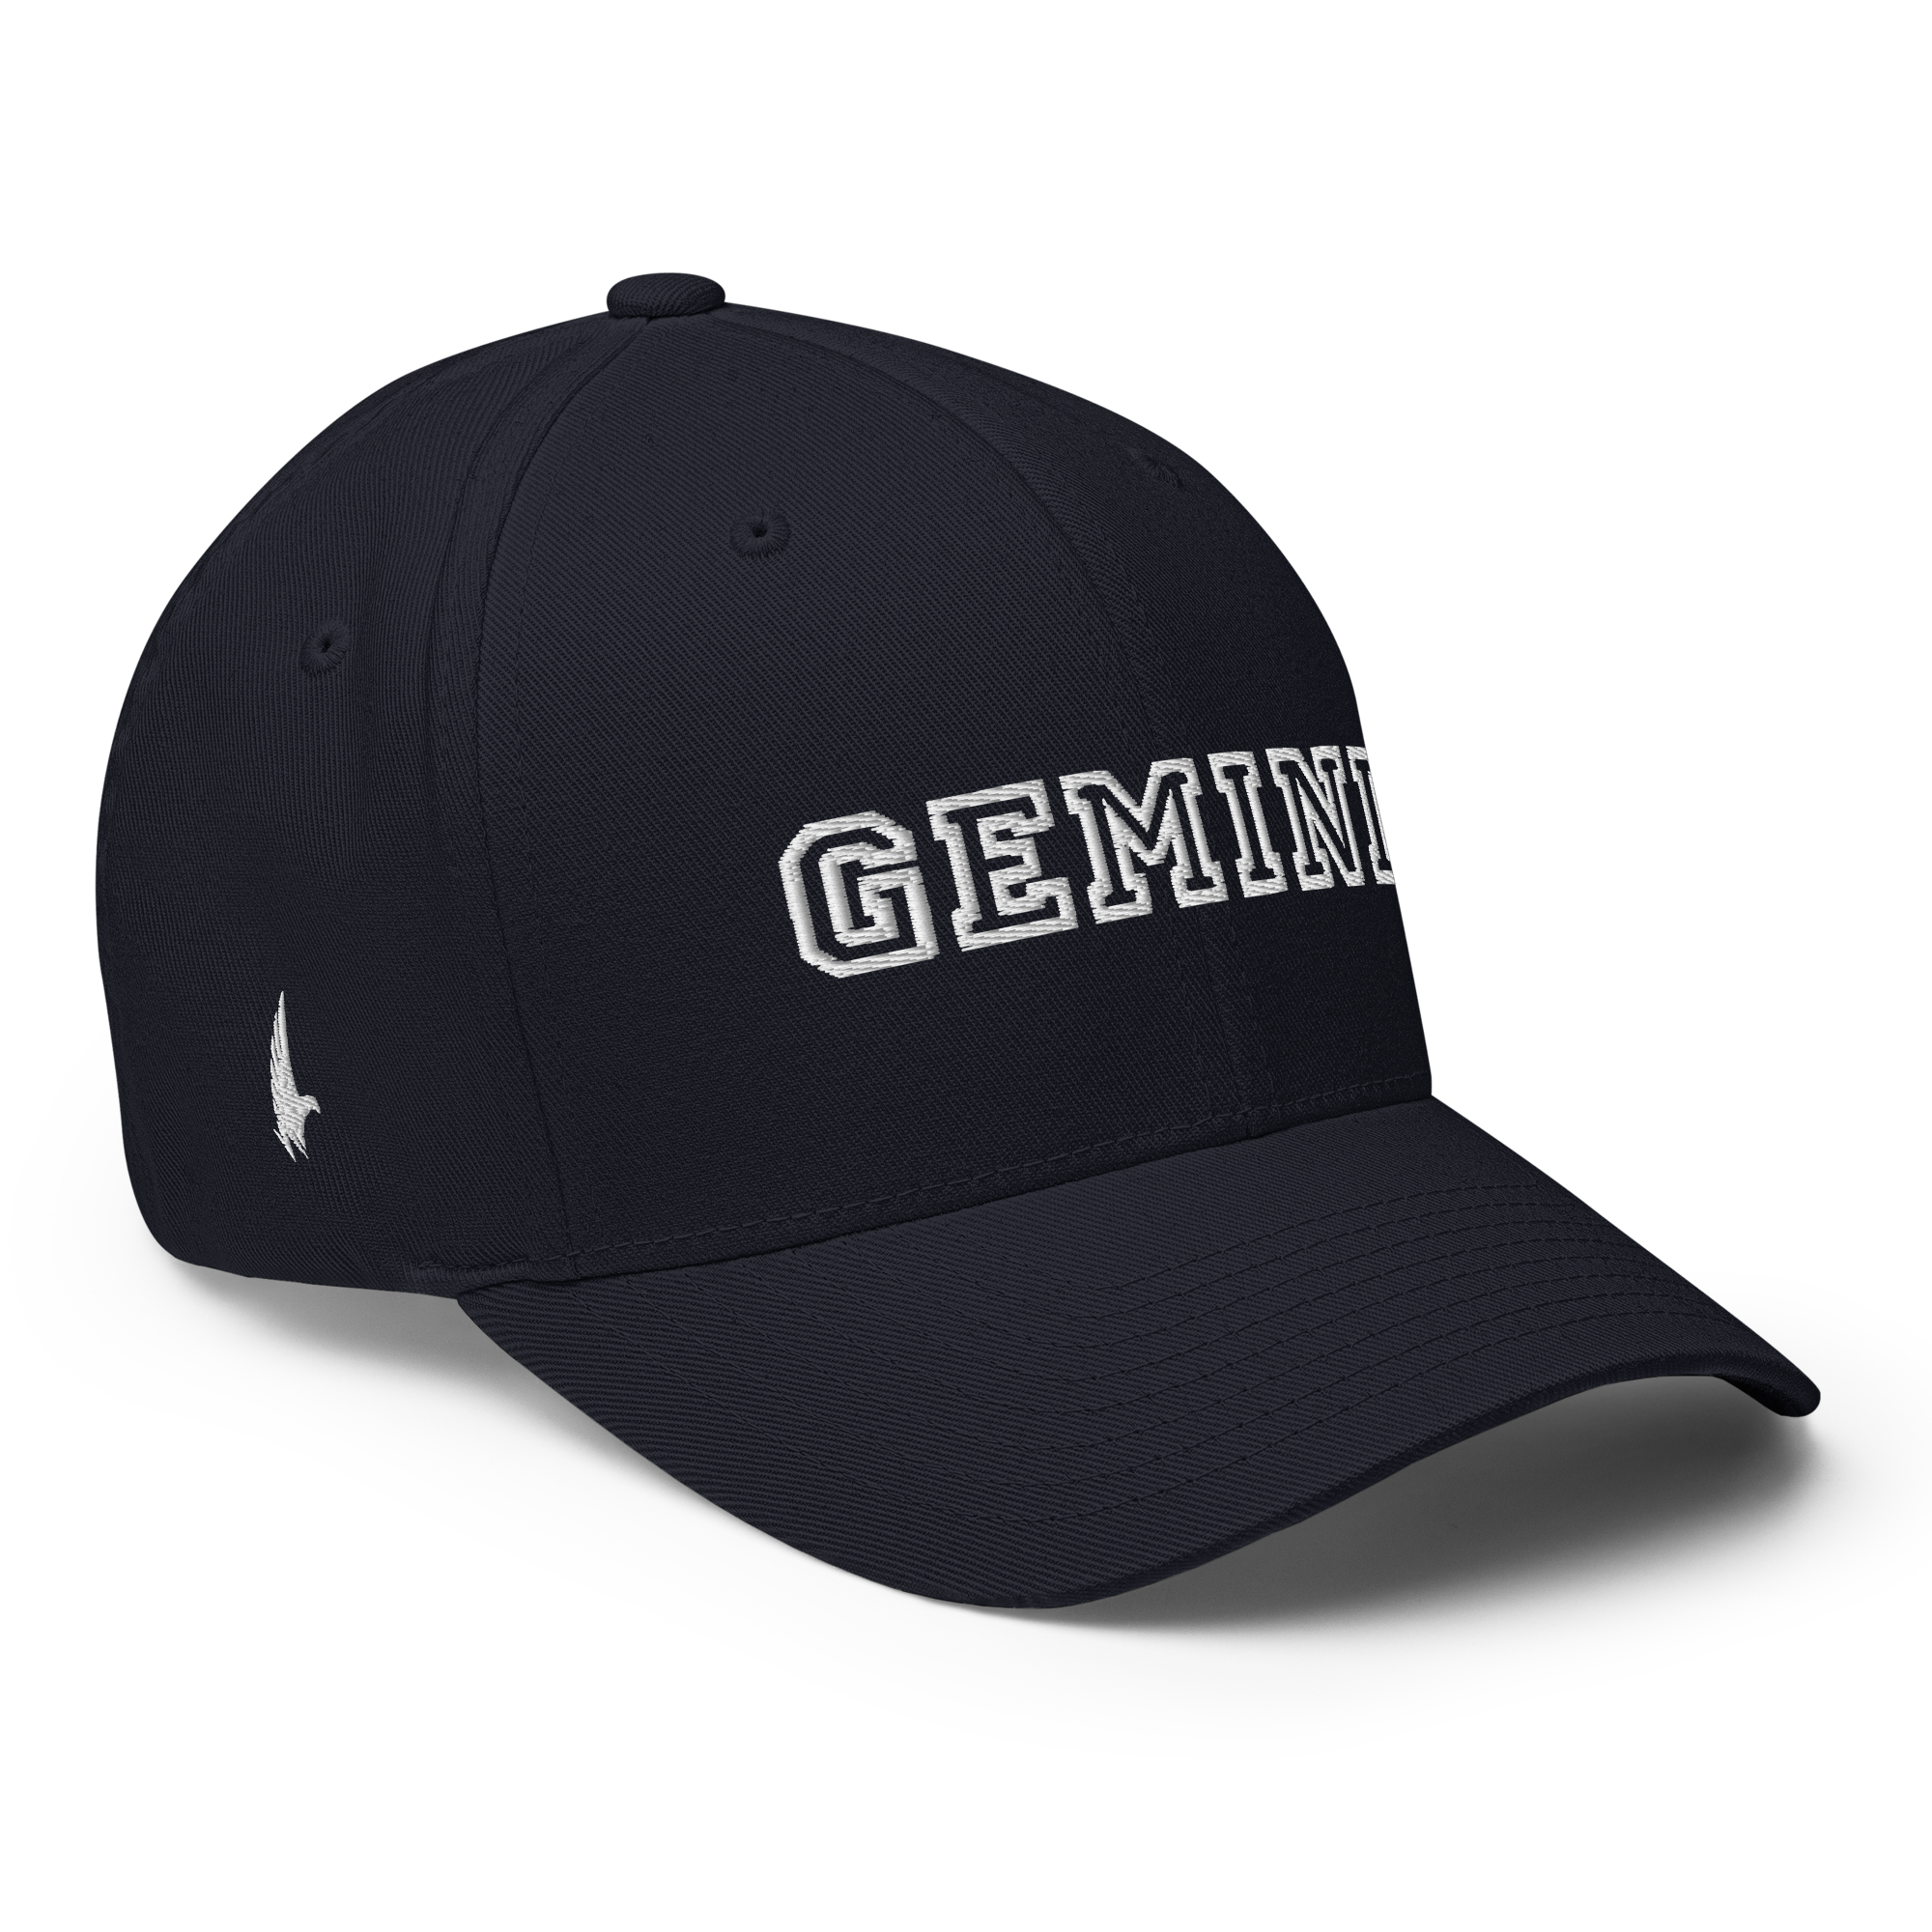 Gemini Legacy Fitted Hat Navy Blue White - Loyalty Vibes